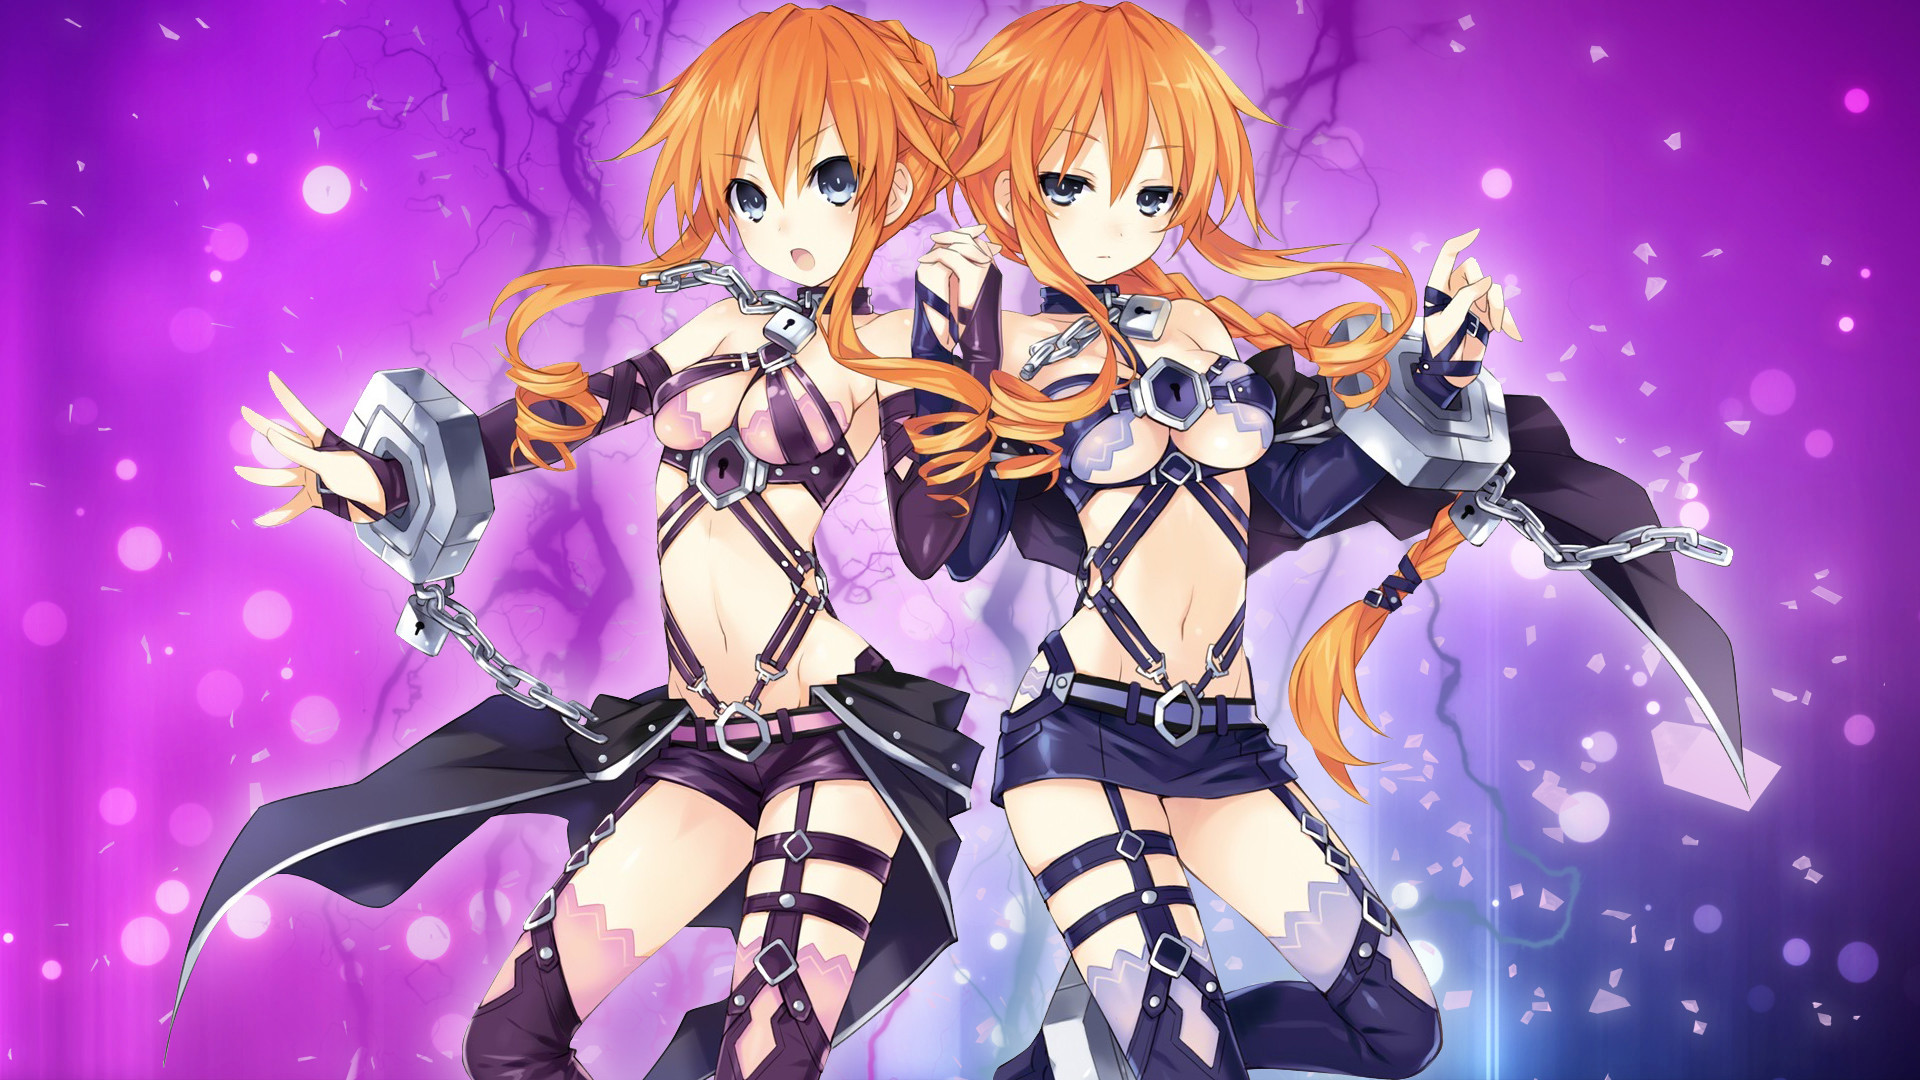 Date A Live image date a live 36324164 1920 1080 19201080 Date a Live Pinterest Live wallpapers, Anime and Wallpaper